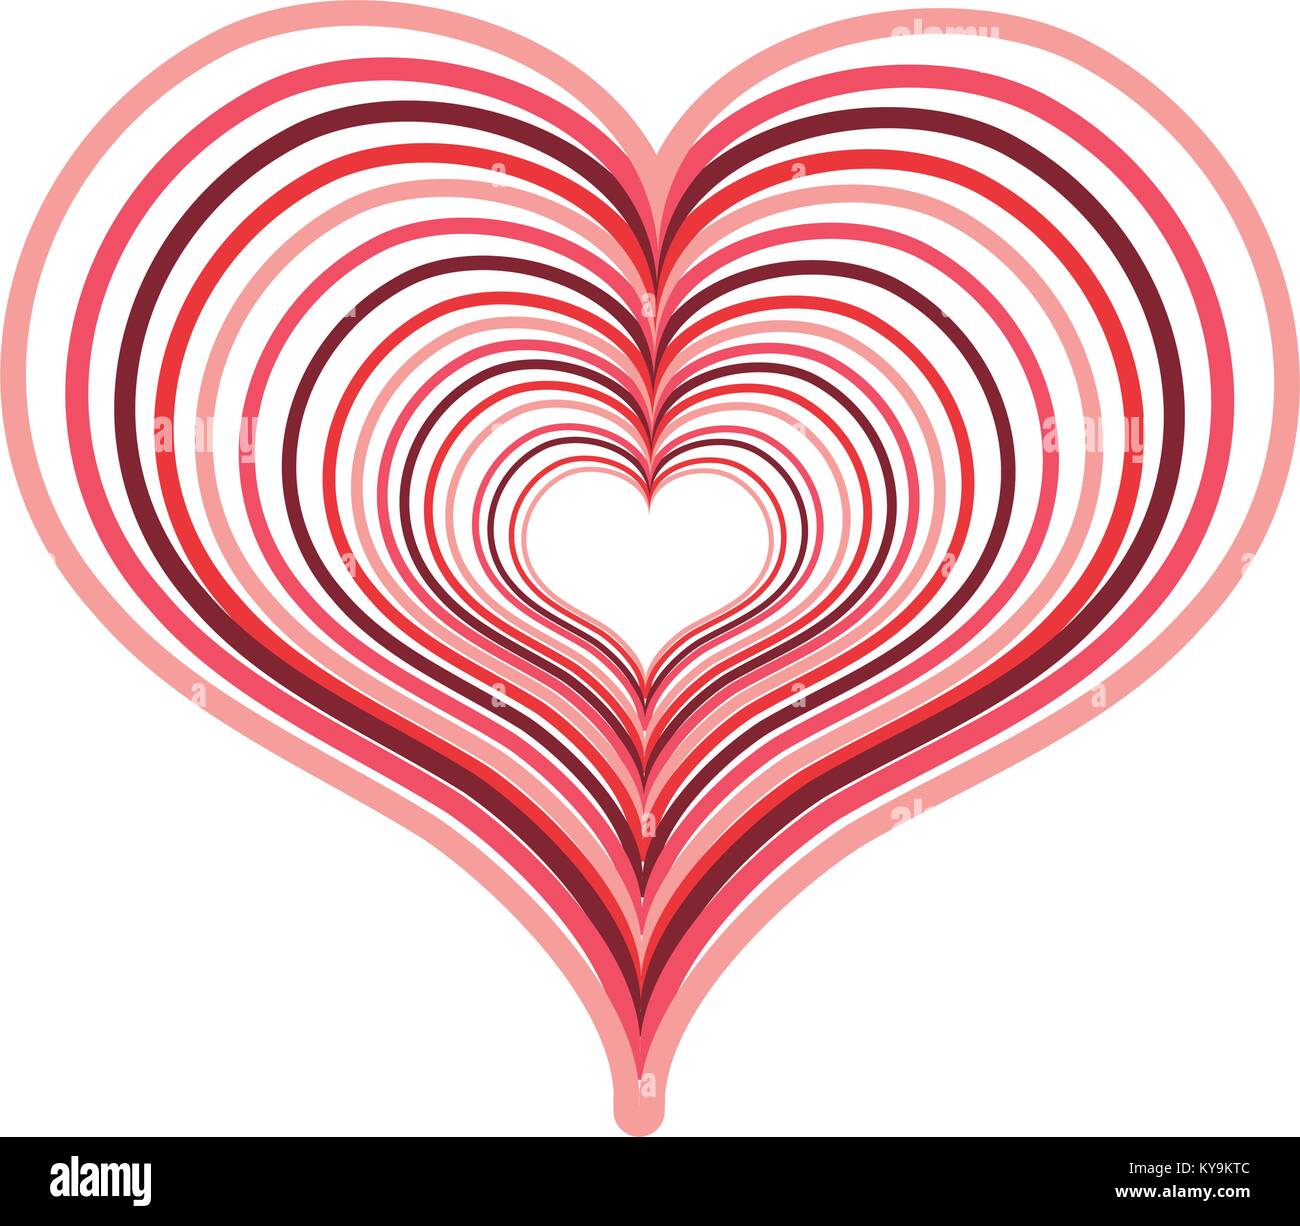 heart love with engraving design decoration Stock Vector